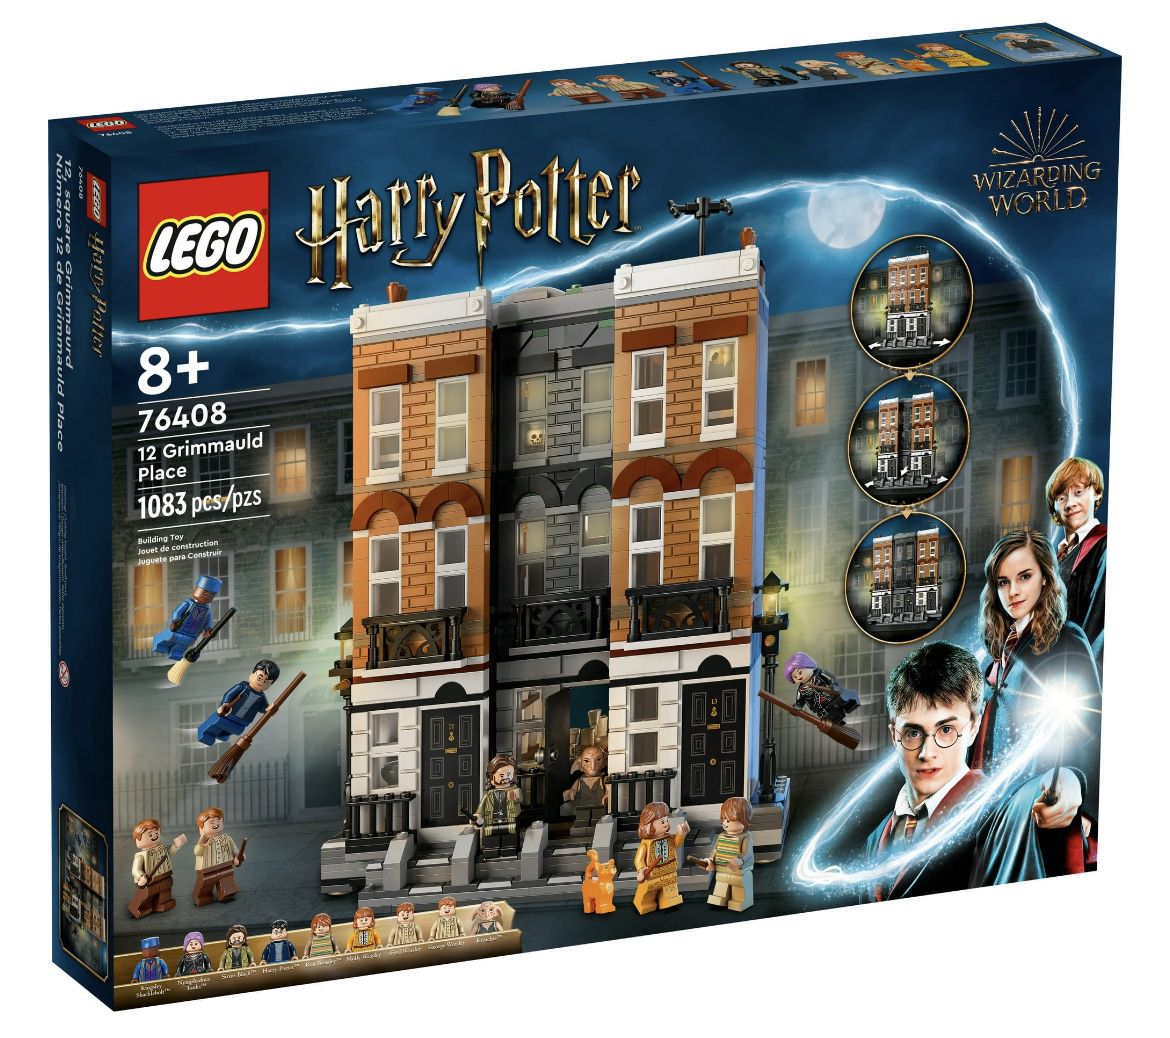 LEGO Harry Potter 12 Grimmauld Place 76408, Headquarters of the Order of the Phoenix Magic Set, Transforming House Model Building with 9 Minifigures i